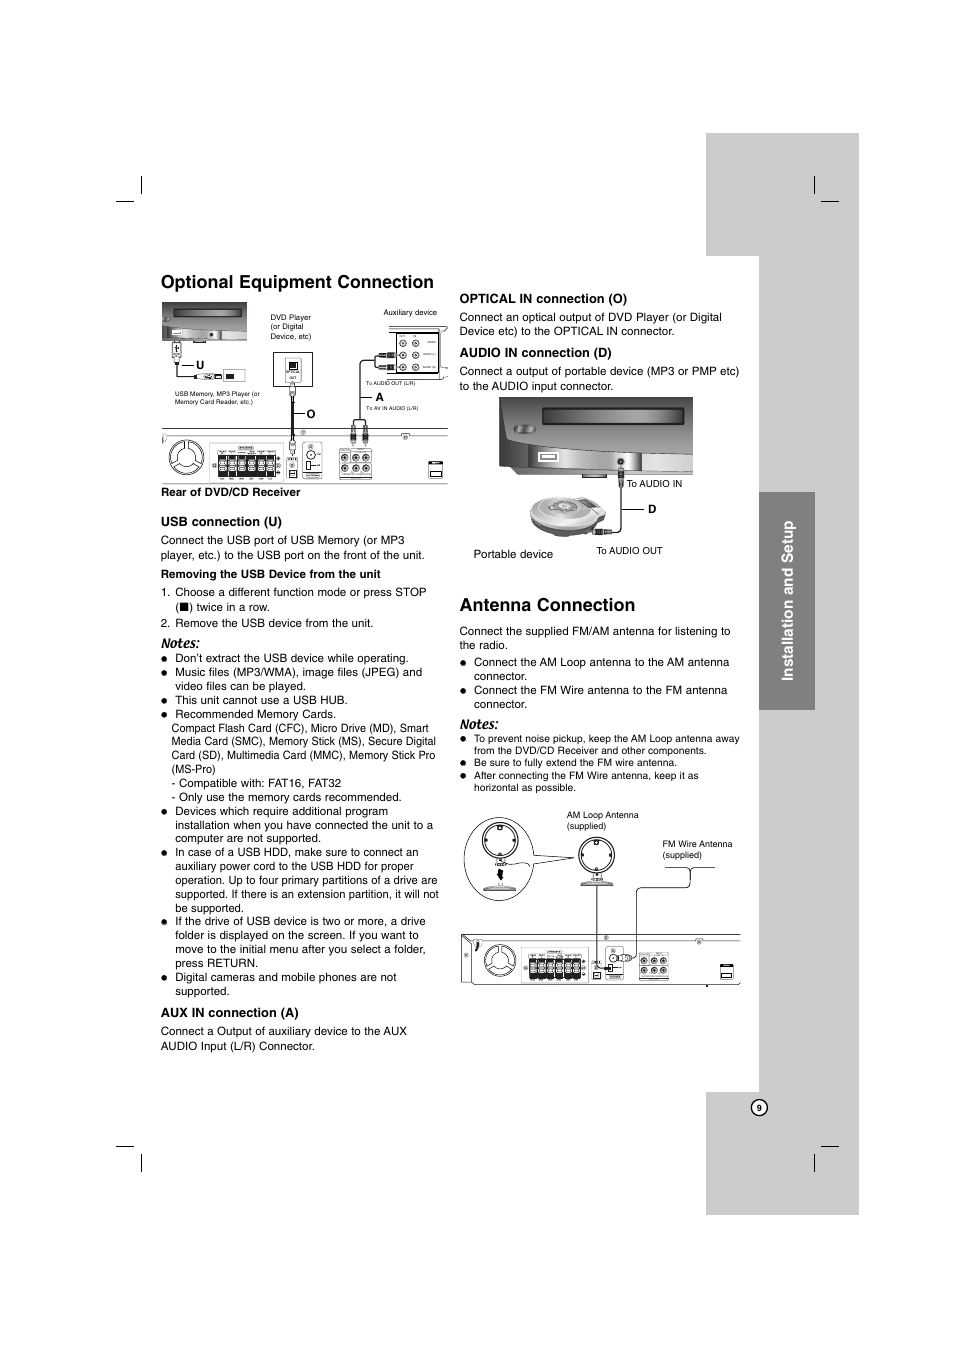 Optional equipment connection, Antenna connection, Installation and setup | Hdmi out, L - aux - r, Usb connection (u), Aux in connection (a), Optical in connection (o), Audio in connection (d) | LG SH72PZ-F User Manual | Page 9 / 28